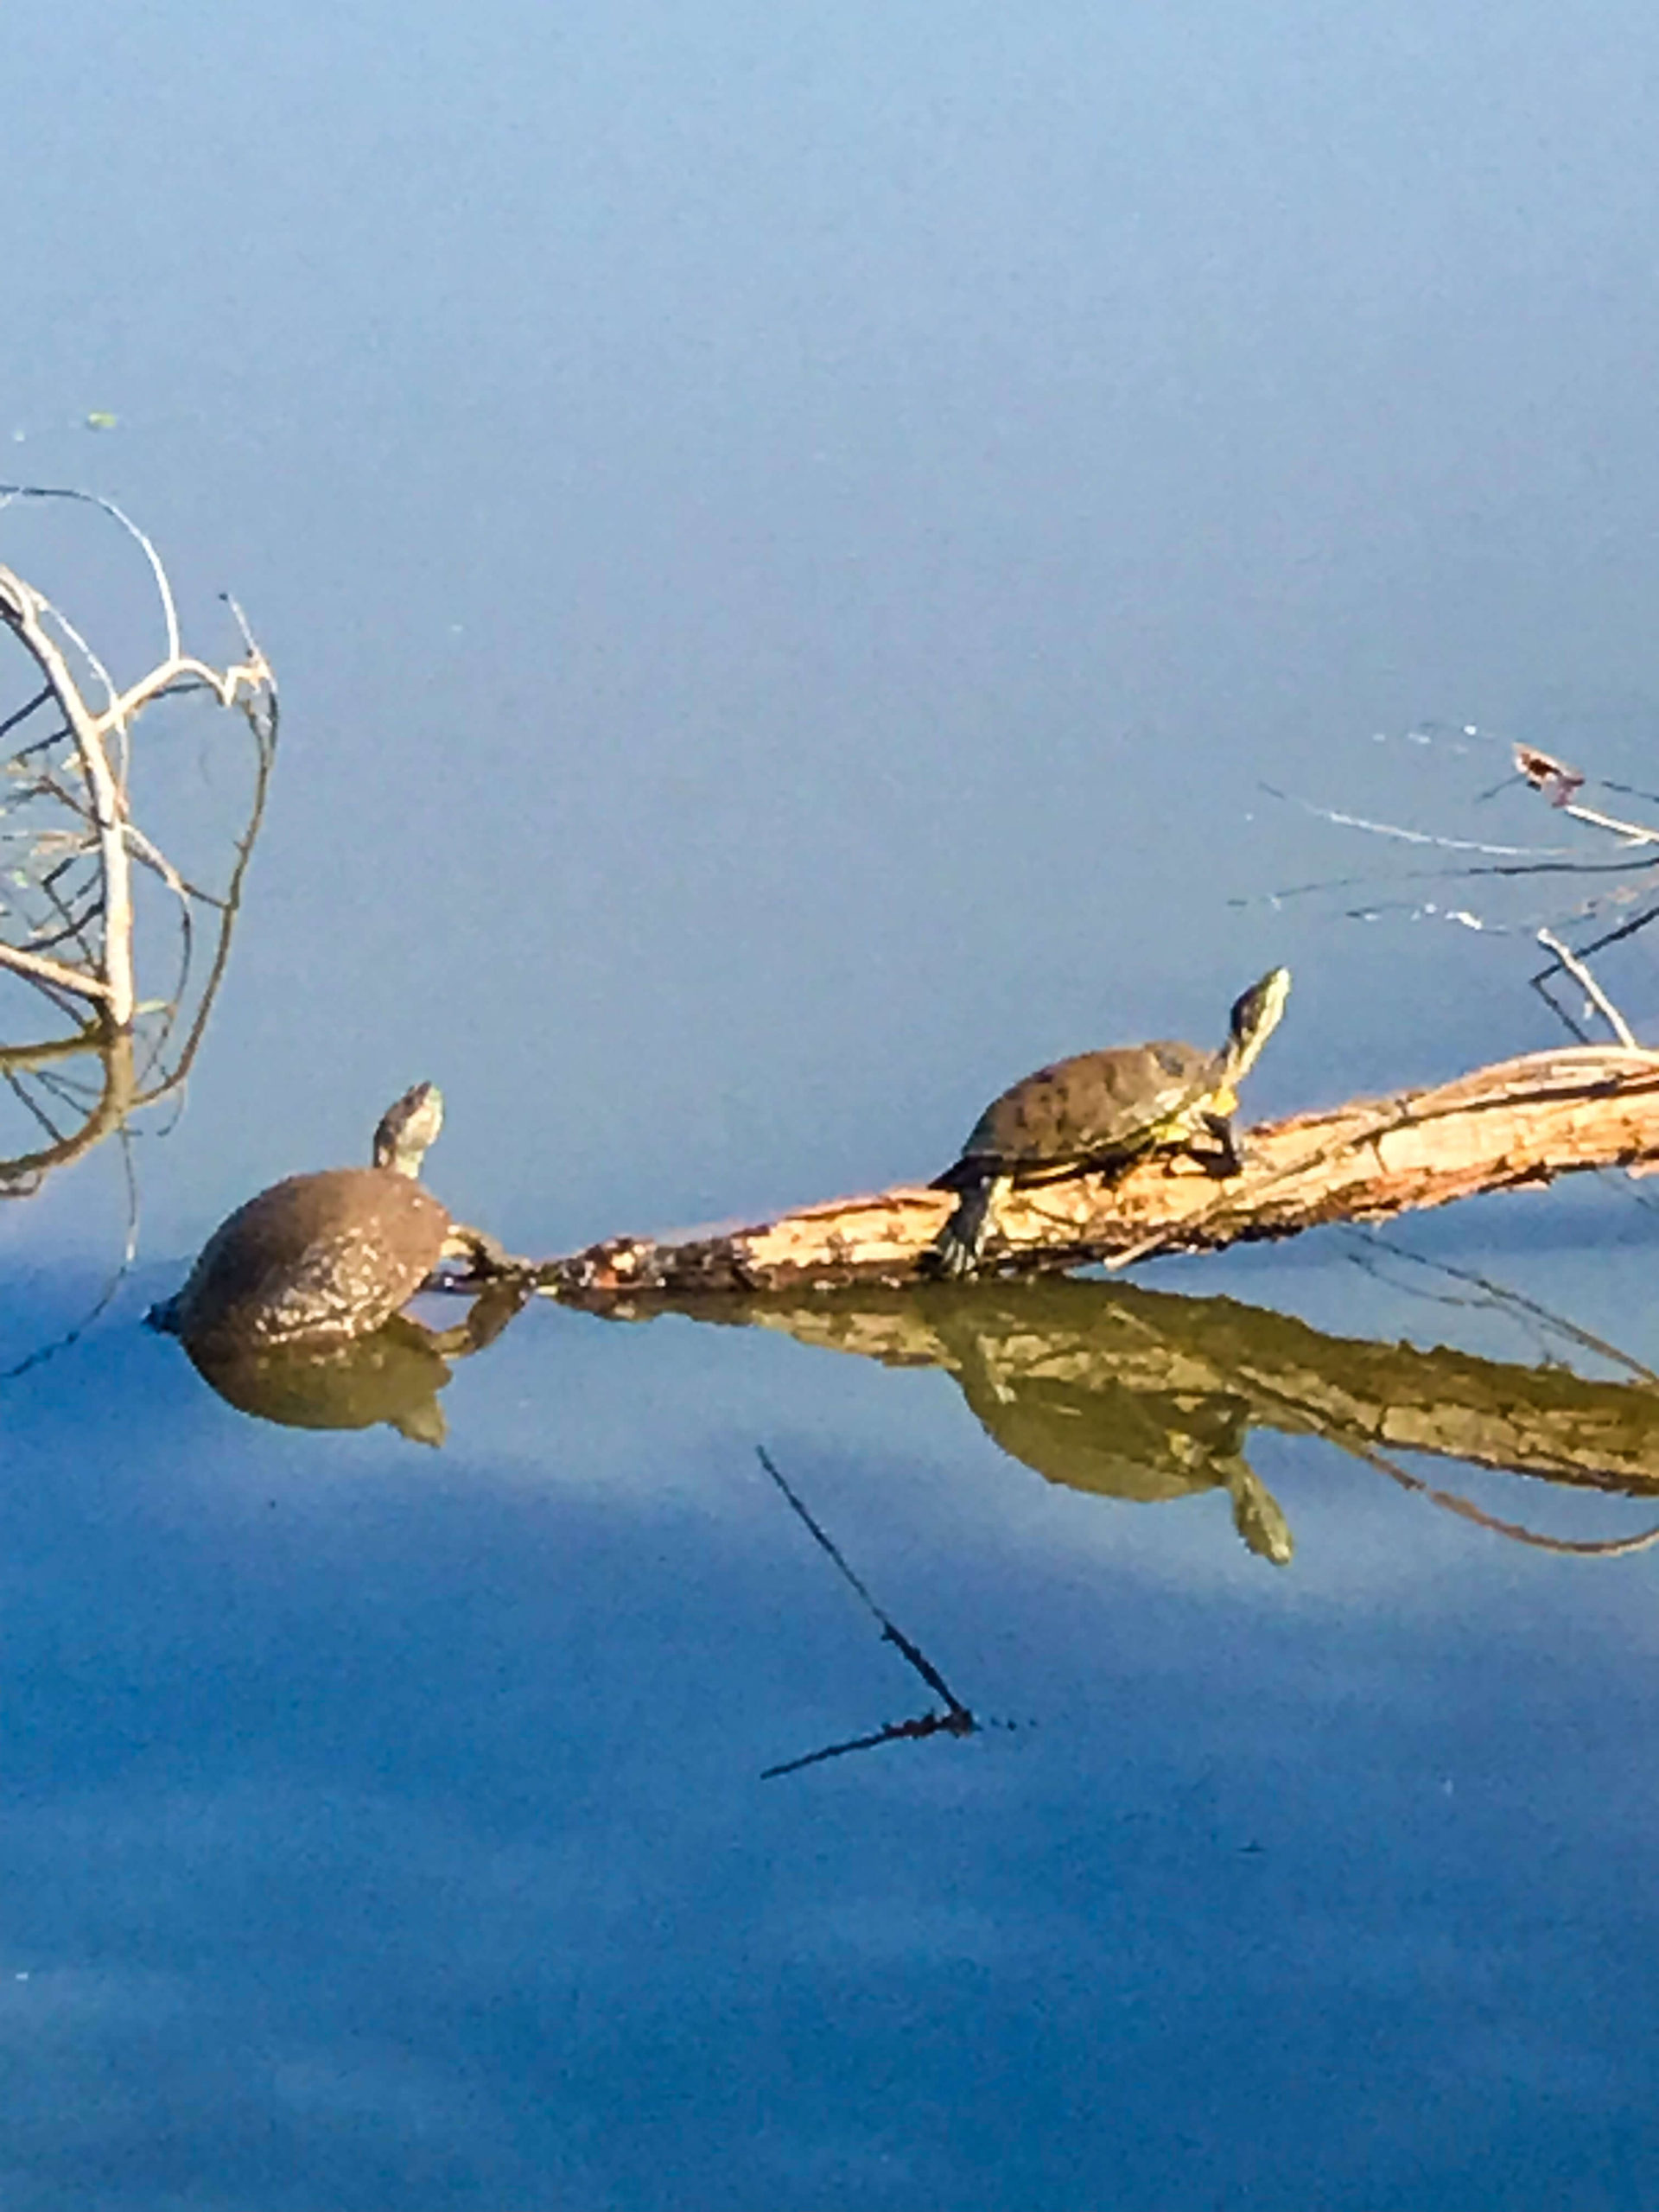 October Morning Walk Turtles on a submerged branch in the pond